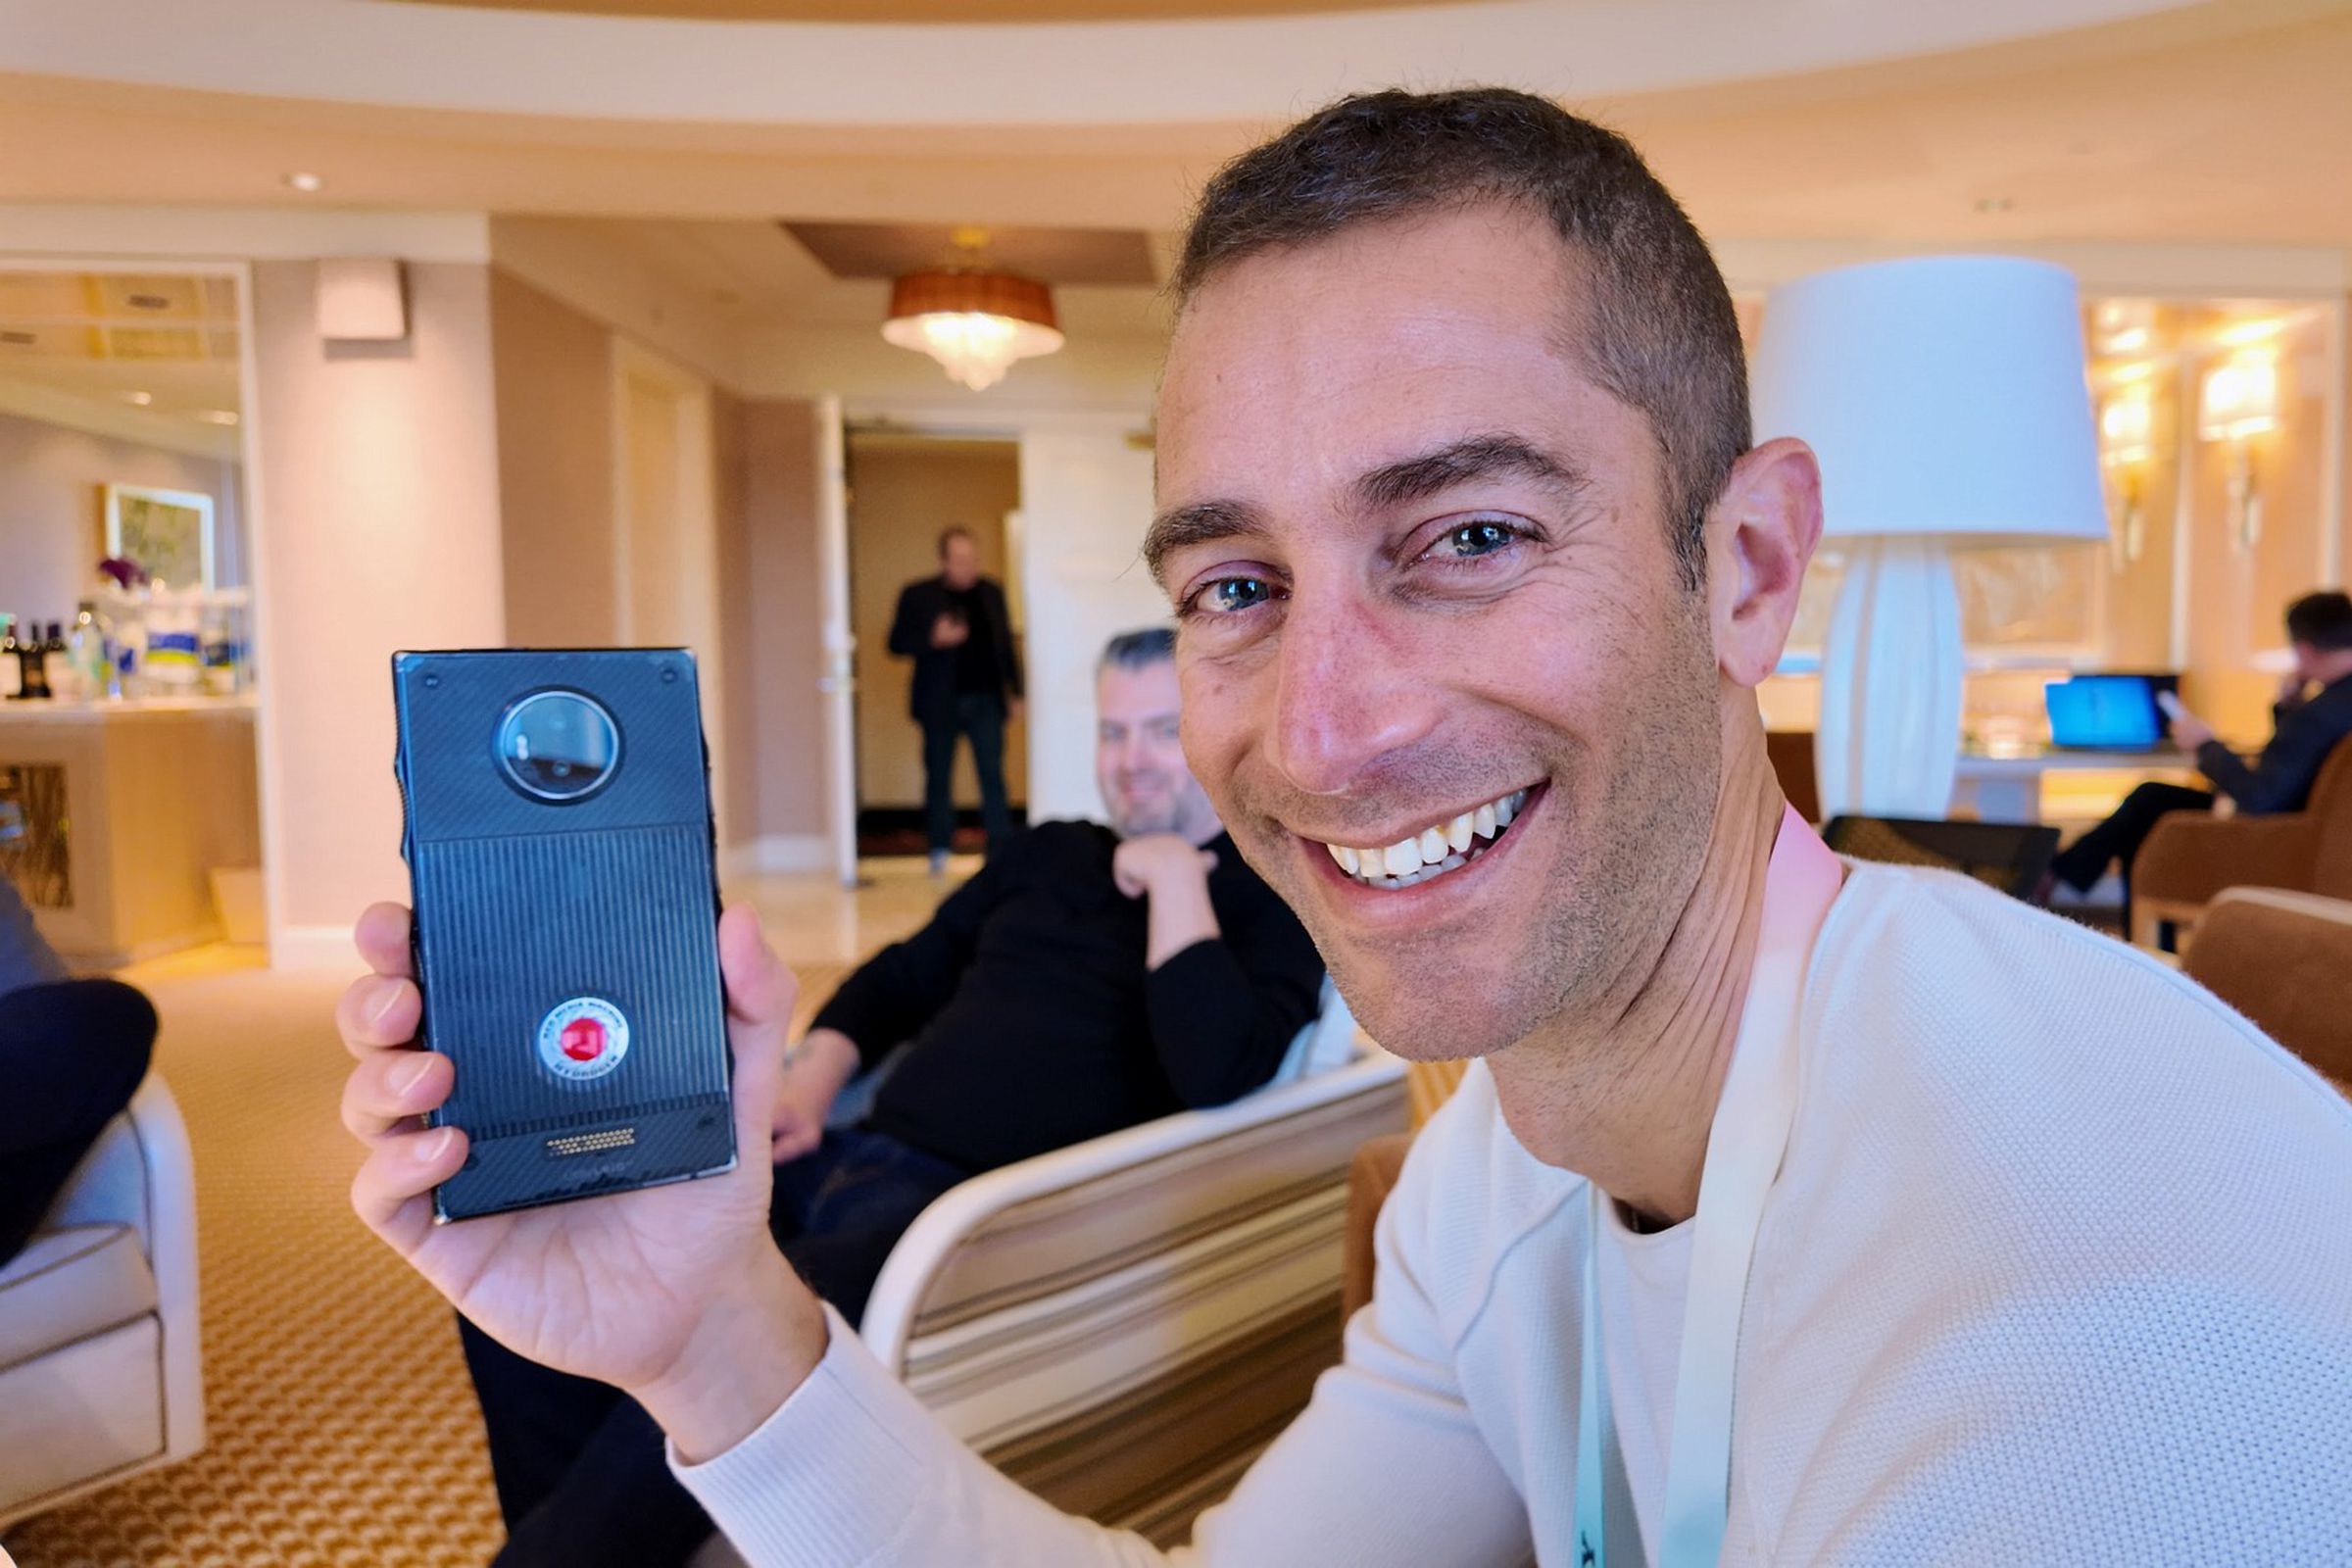 Leia co-founder and CEO David Fattal, with his Red Hydrogen smartphone.